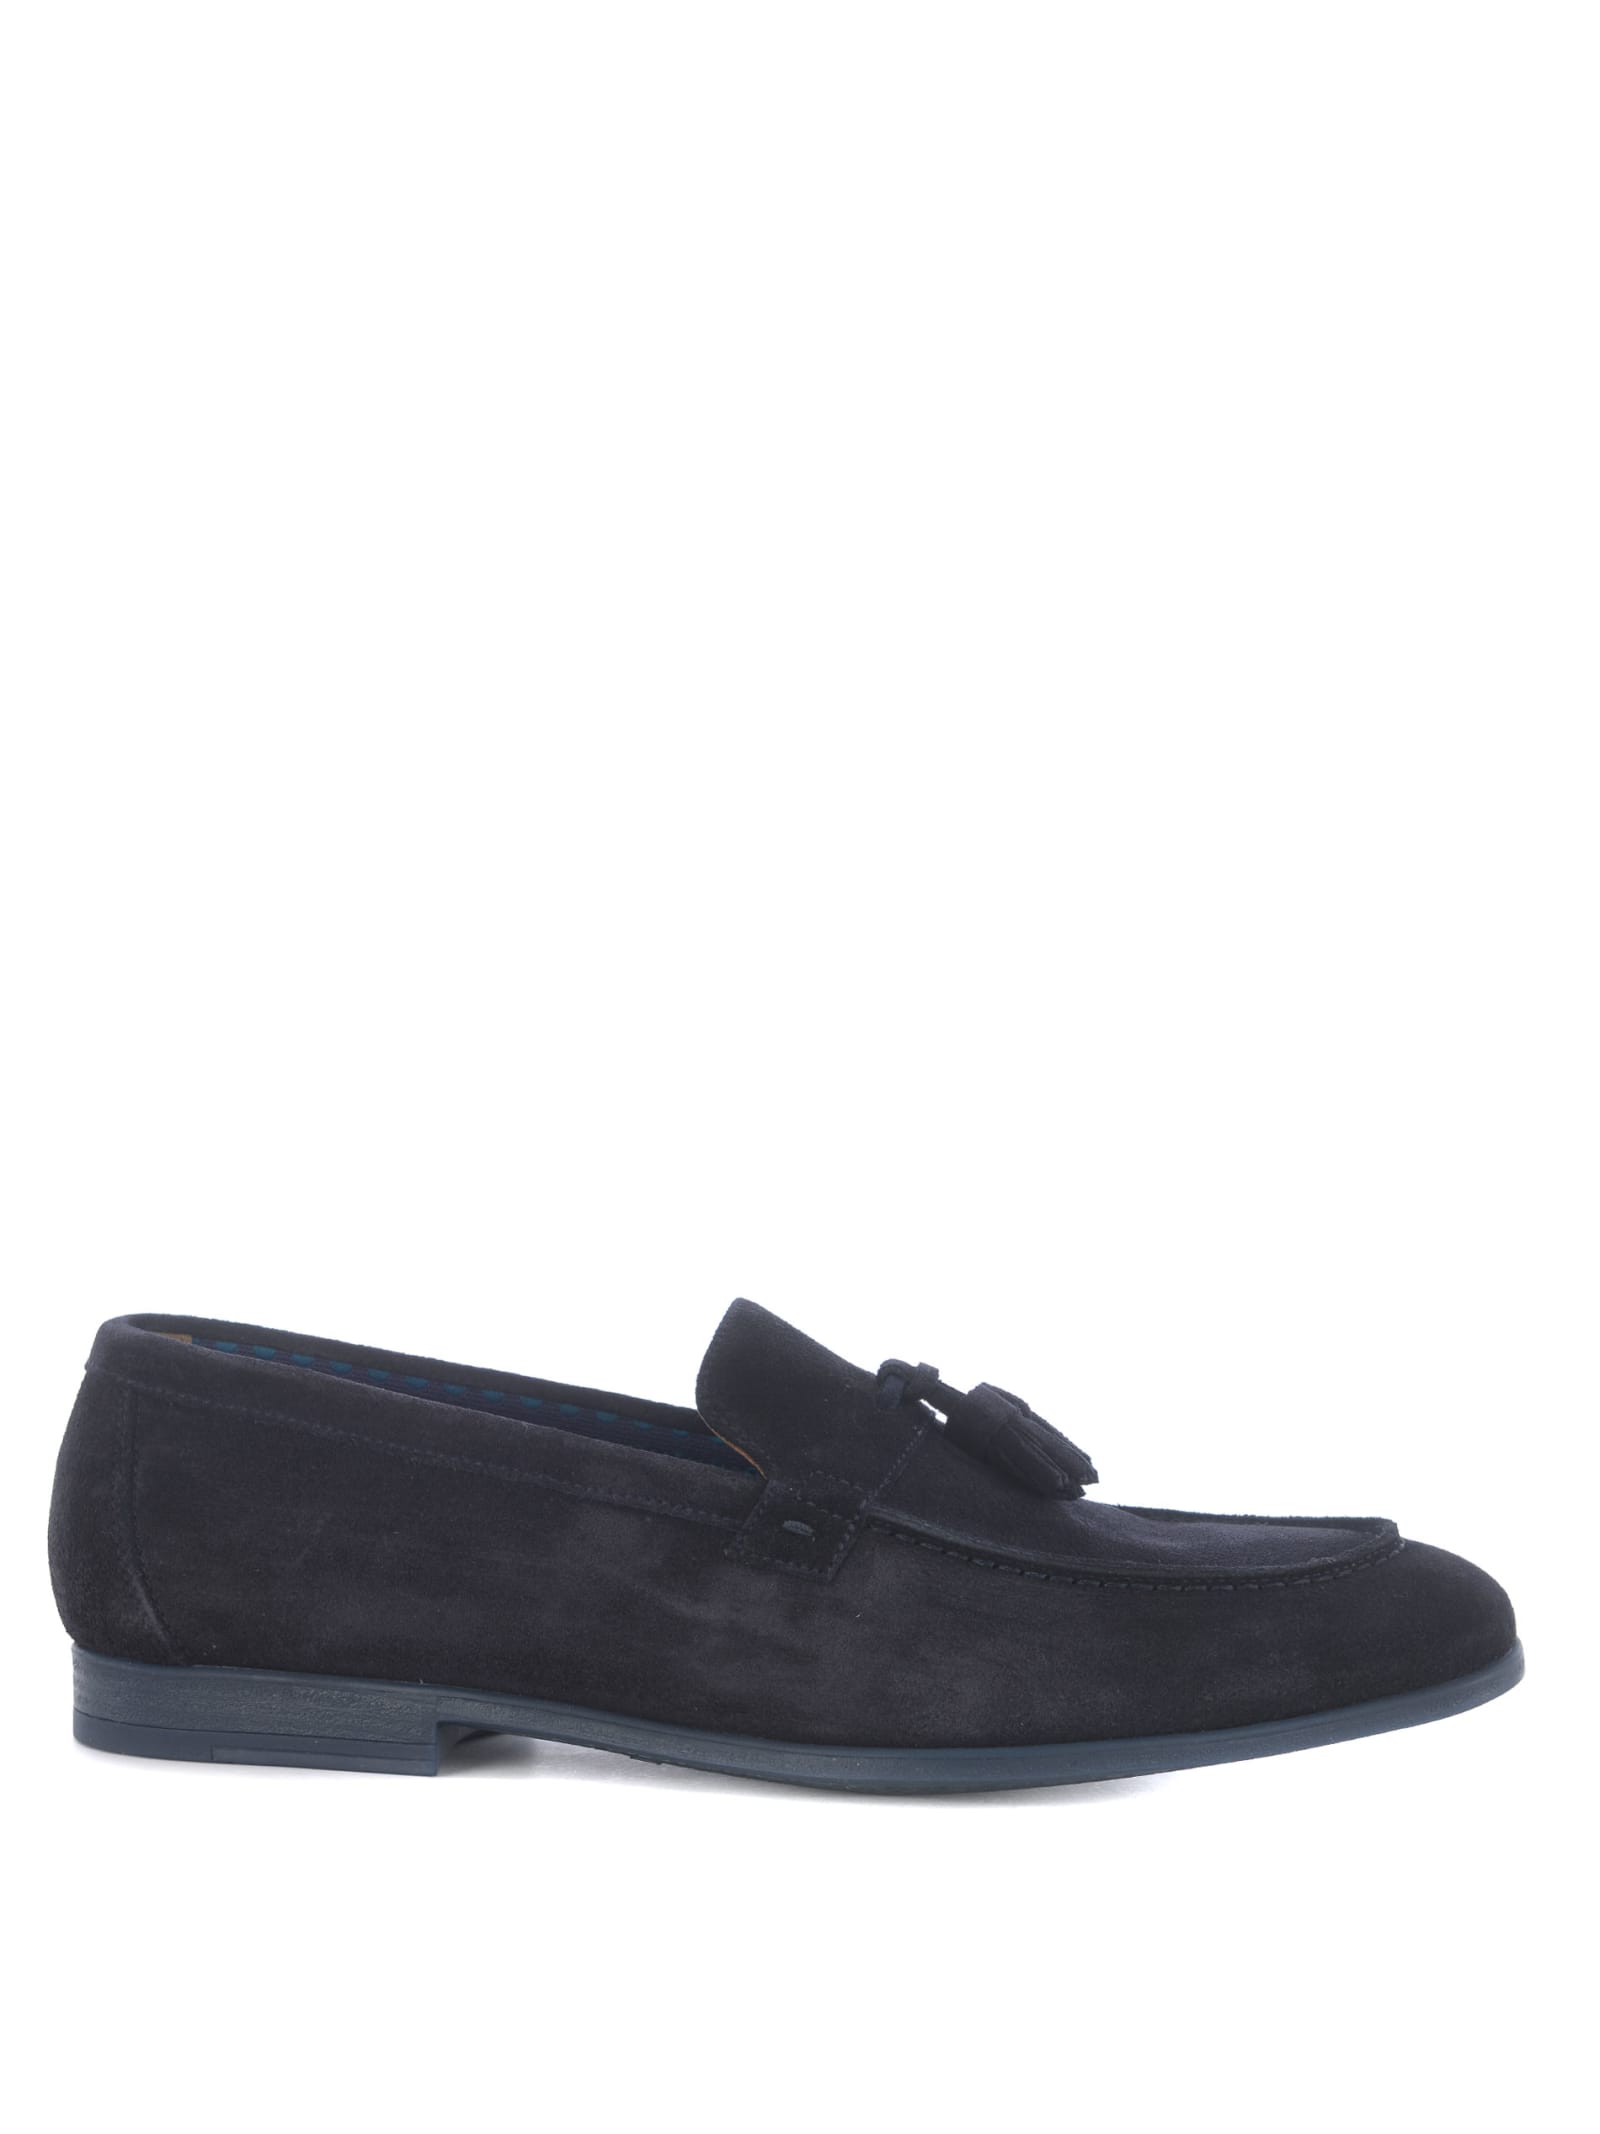 Doucal's Doucals bokeh Suede Loafers